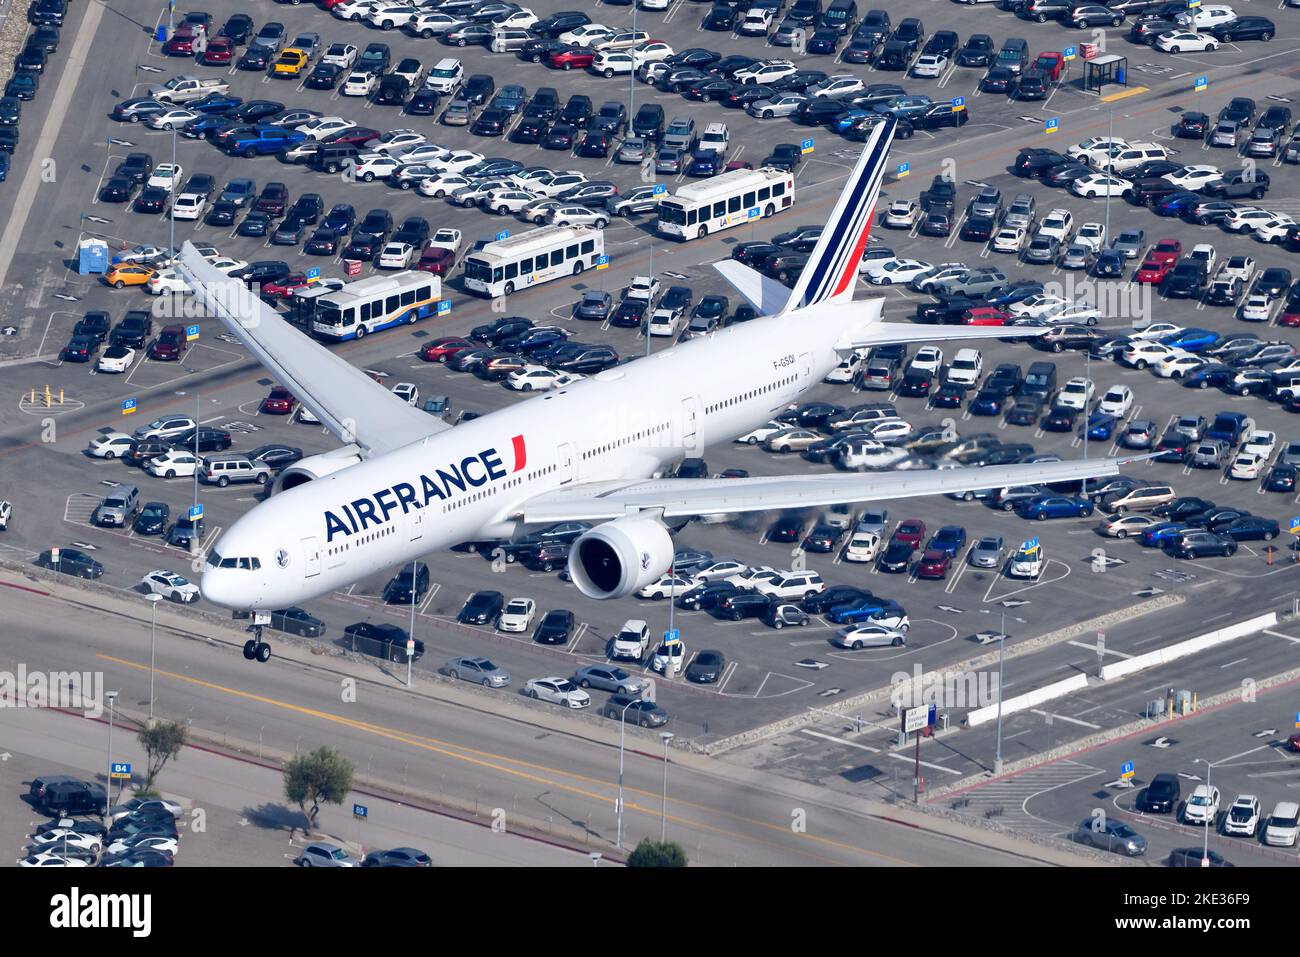 Air France Boeing 777 aircraft. Airplane of french airline and 777-300ER model. Air France plane F-GSQI. Stock Photo